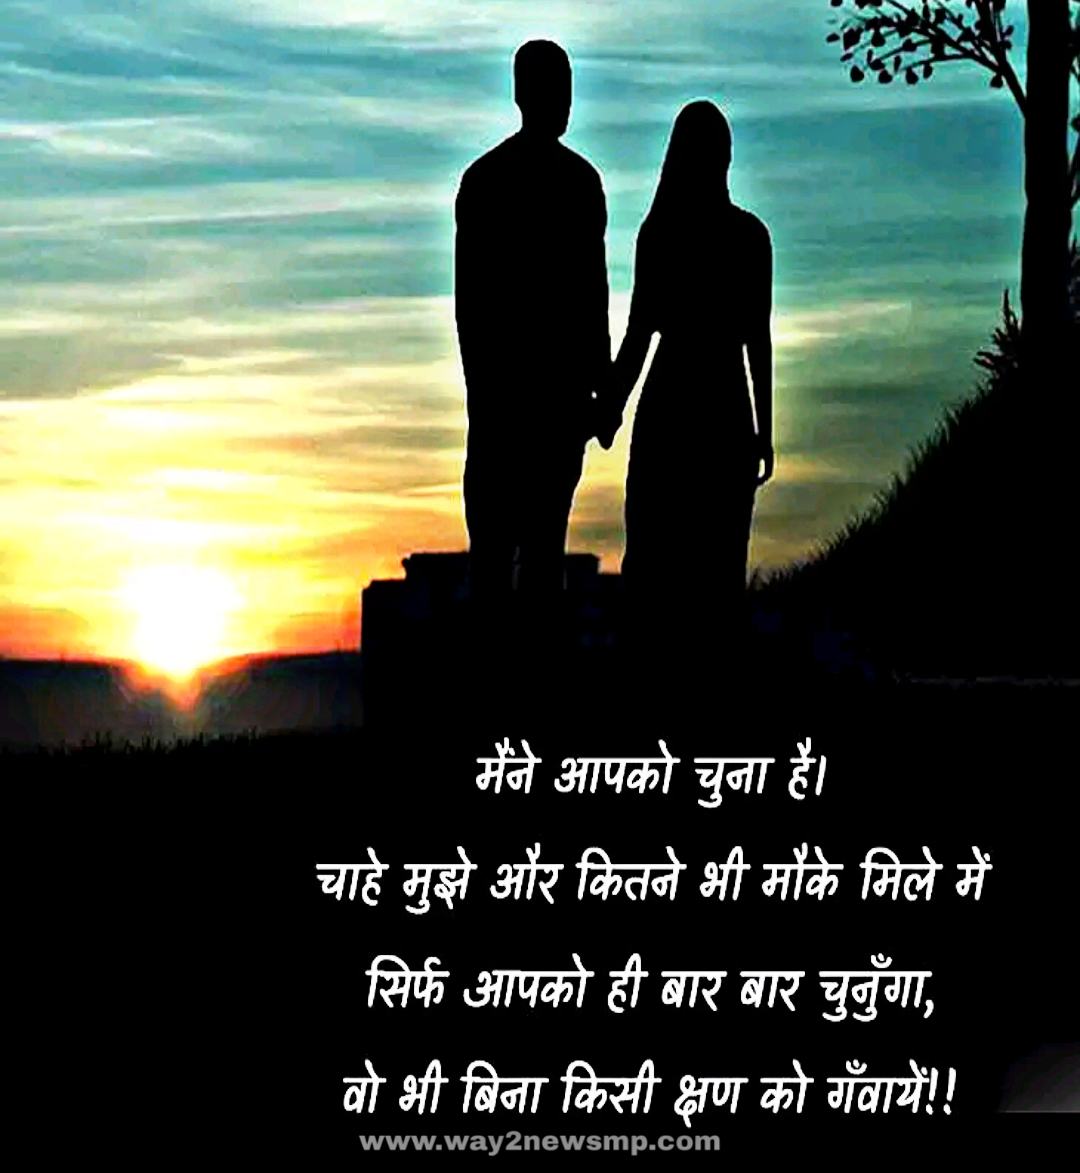 Love Shayari Image In Hindi With Hd Wallpaper - You Re Too Good To Be True  Quotes - 1080x1173 Wallpaper 